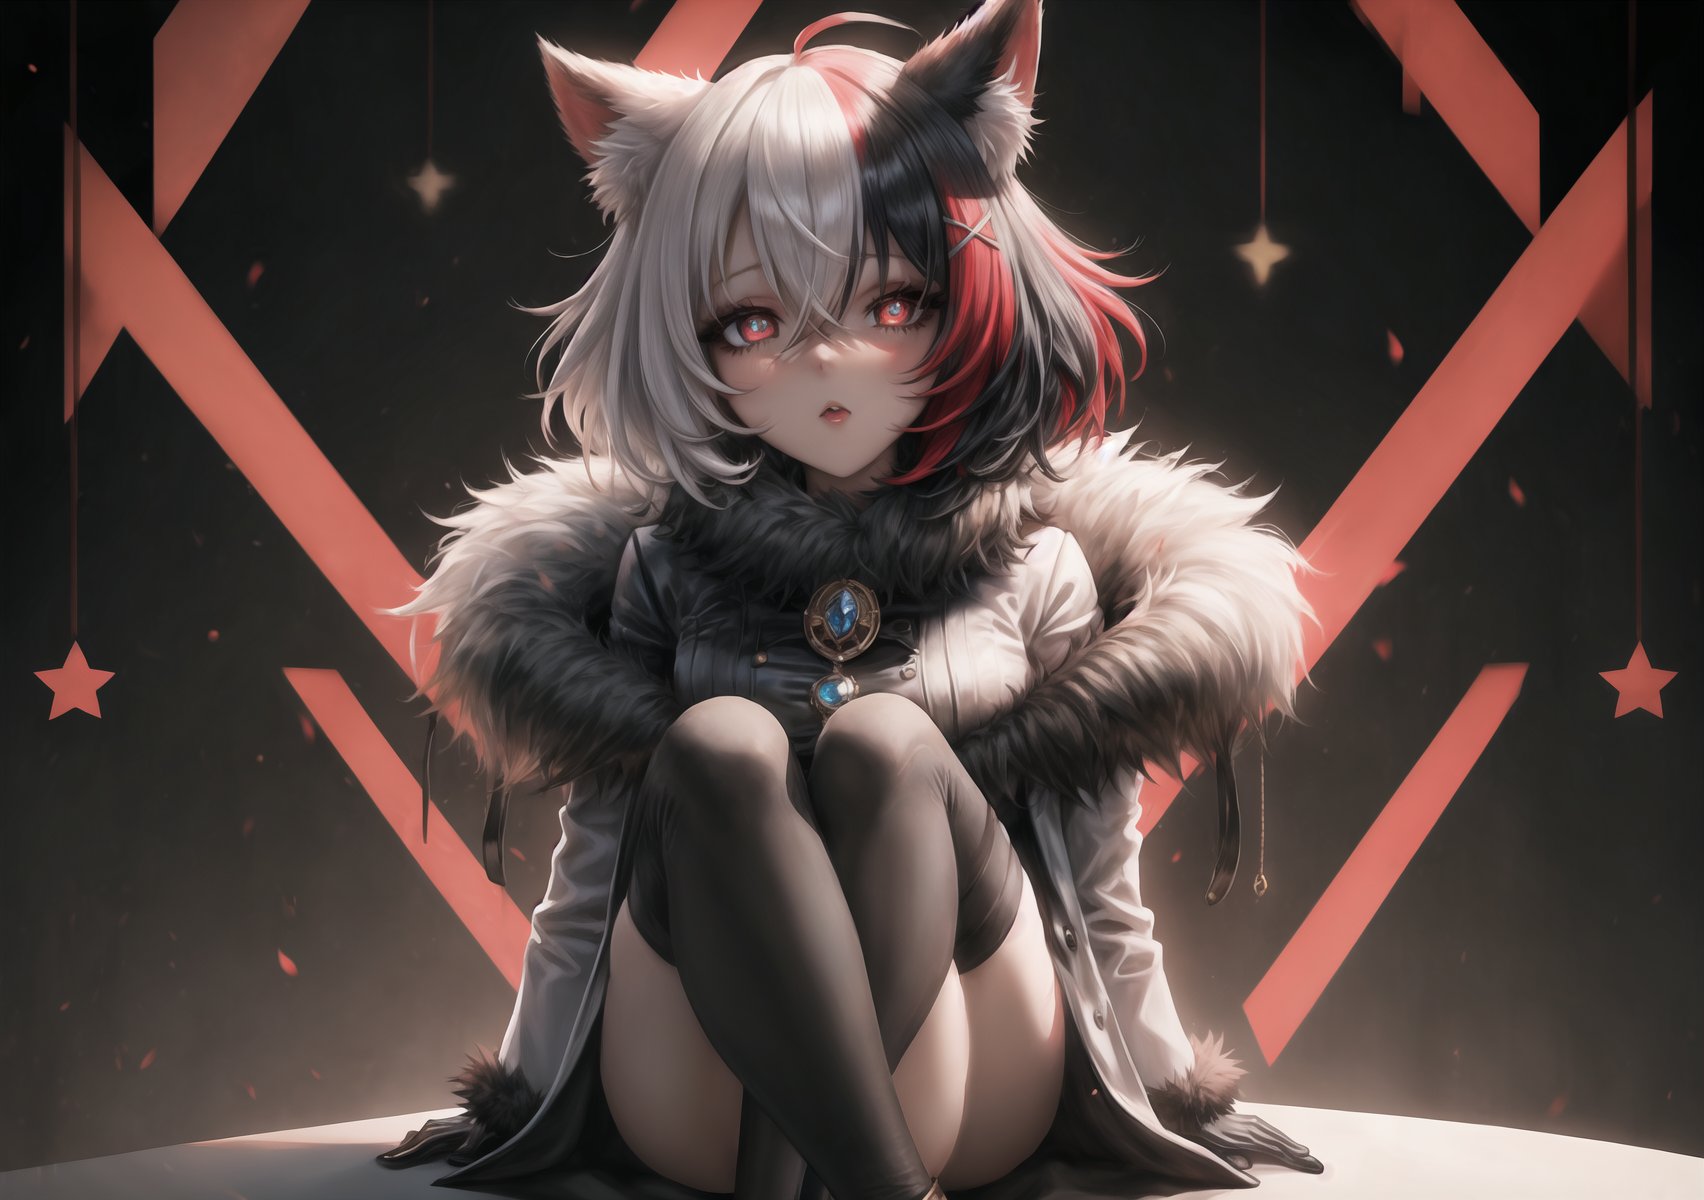 1 curvy woman, black_eyes, coat, piercing_ears, fur coat, clipped feet, gloves, hair_between_eyes, high resolution, multicolored_hair, red_pupils, short_hair, side bangs, solo, highlighted_hair, two_tone_hair, white_gloves, white_hair, x-shaped_pupils, black_hair, blurred, brooch, cloak, dark_background, depth_of_field, fur-trimmed_coat, fur_trimming, hair_between_eyes, hires, jewellery, looking_at_viewer, multicolored_hair, portrait, red_eyes, short_hair, solo, short_hair, symbol_shaped_pupils, bicolor_hair, white_coat , white_hair, X-shaped pupils, full body, sitting, feet up on a table